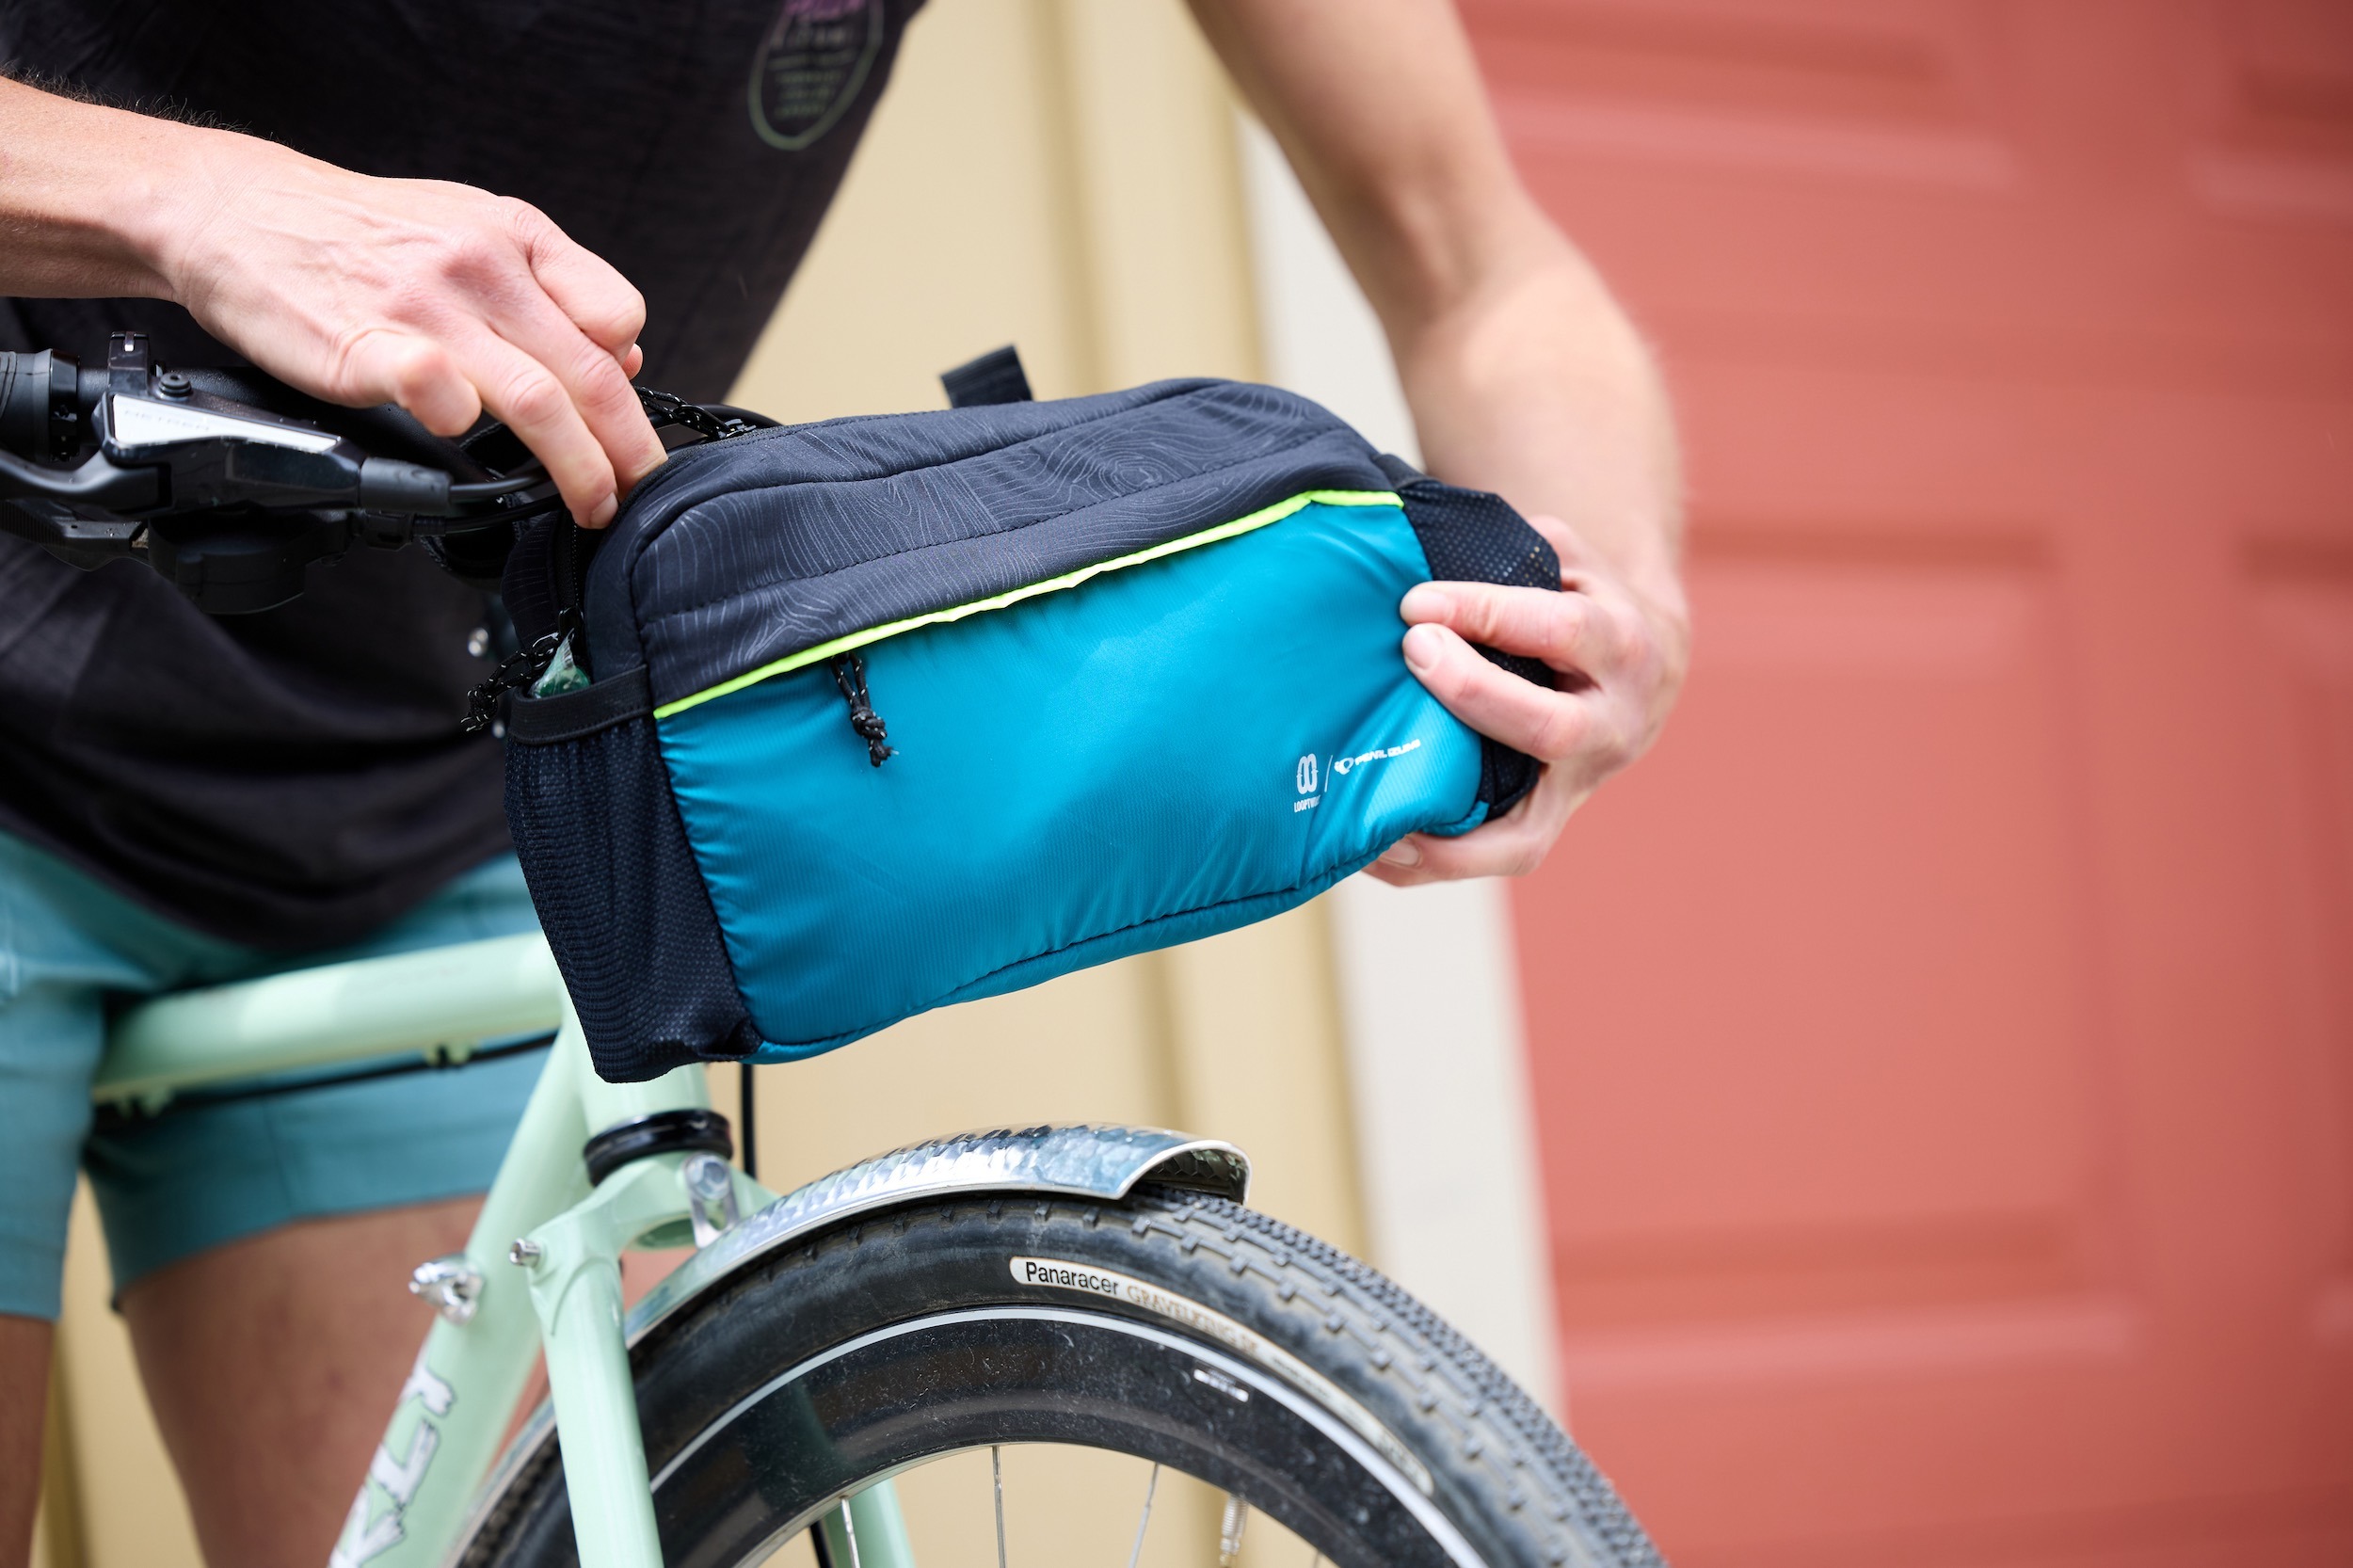 Pearl Izumi partners with Looptworks to turn jacket scraps from the cutting room floor into upcycled bike bags.